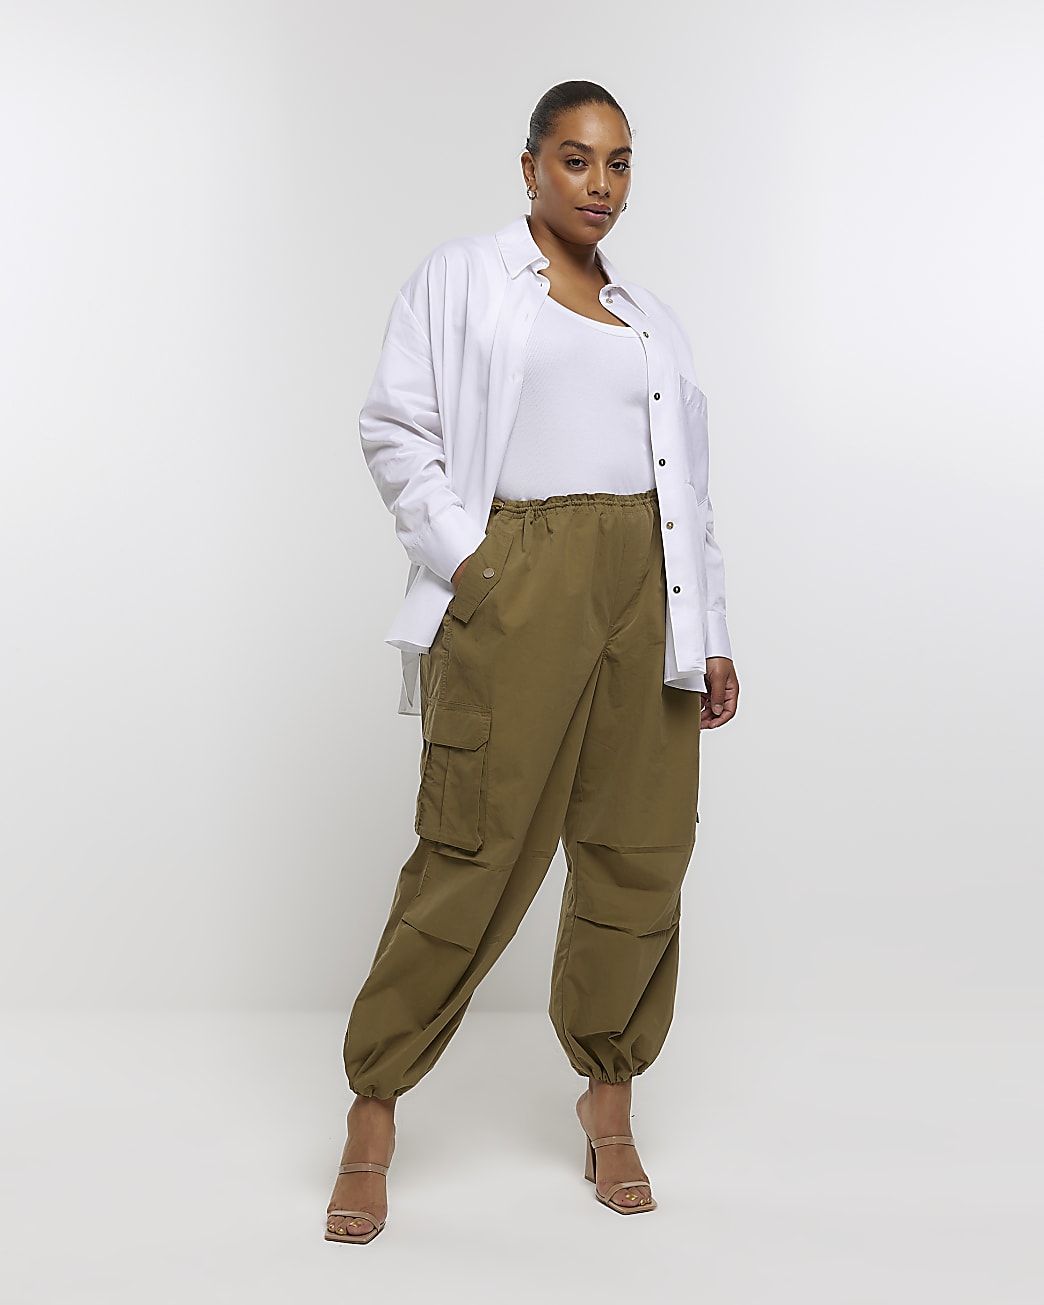 Parachute pants are the latest Y2K trend we can't get enough of